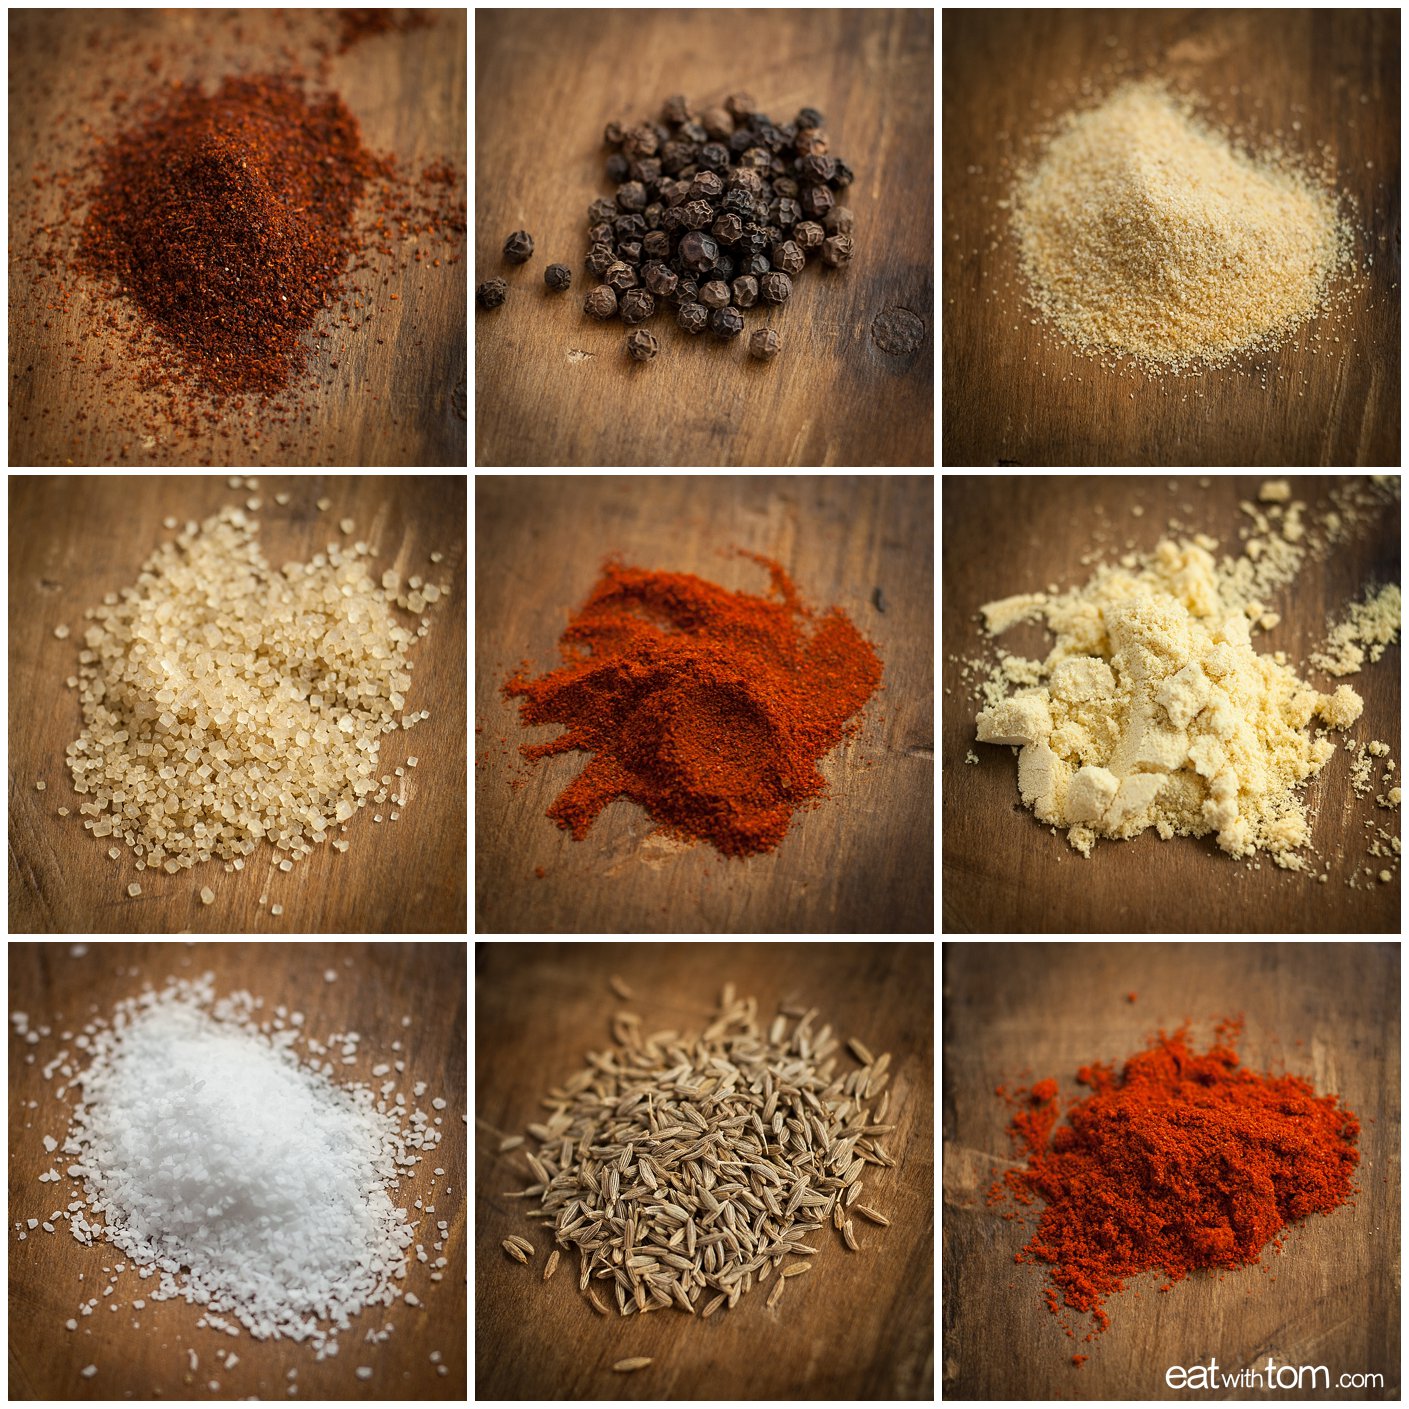 Hot wing dust recipe - Spice House Chicago magic dust from mike mills peace love bbq